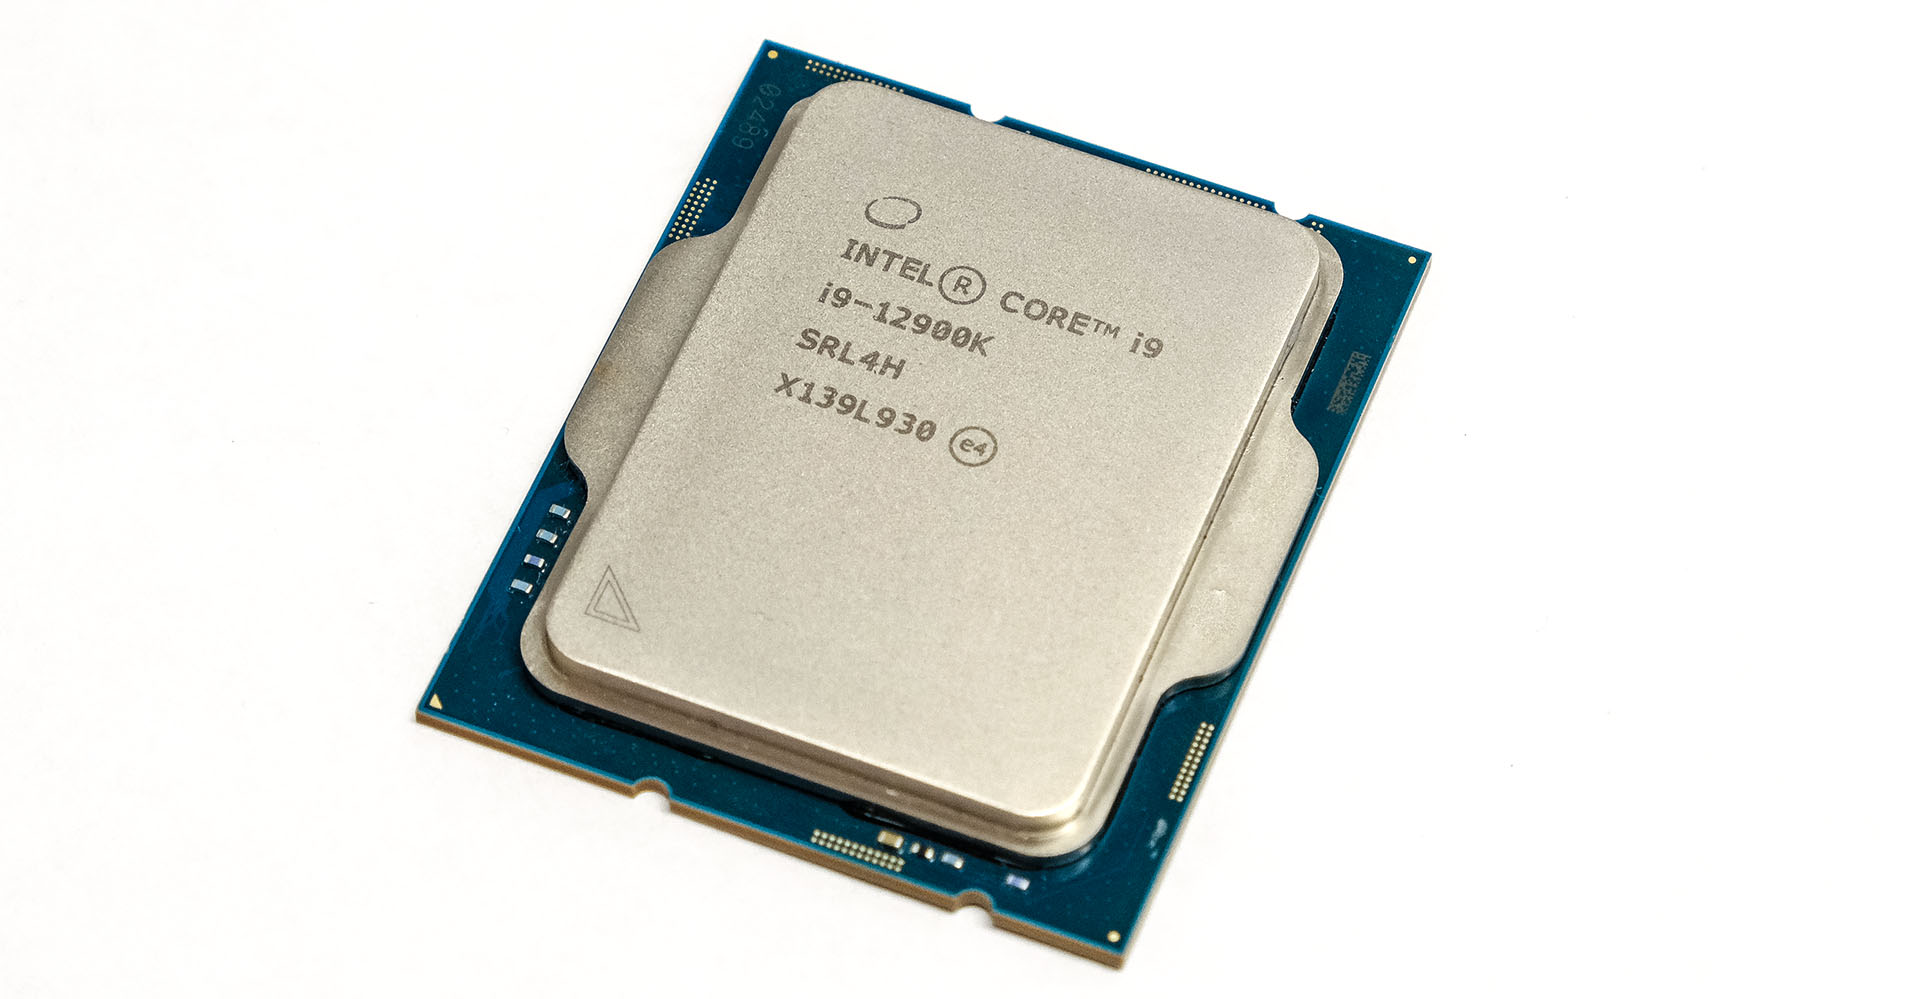 The Intel Core i9-12900K scales crazy heights with a new extreme